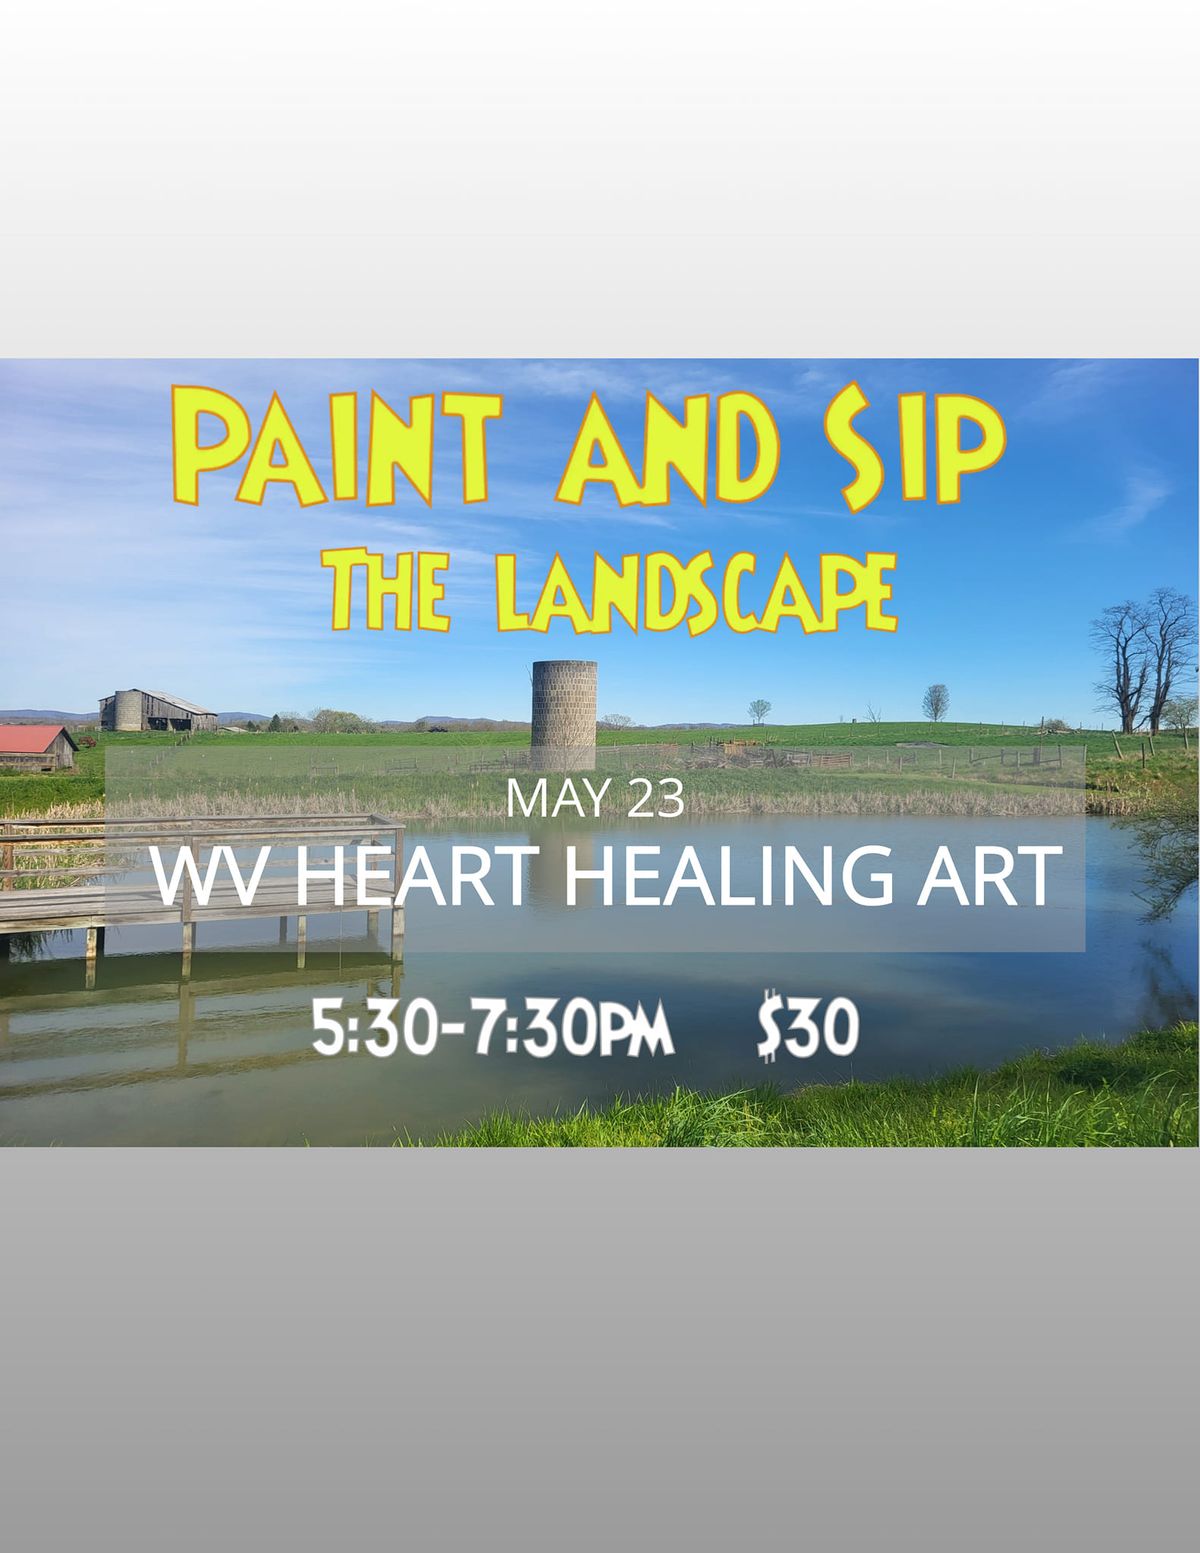 Paint and Sip the Landscape 